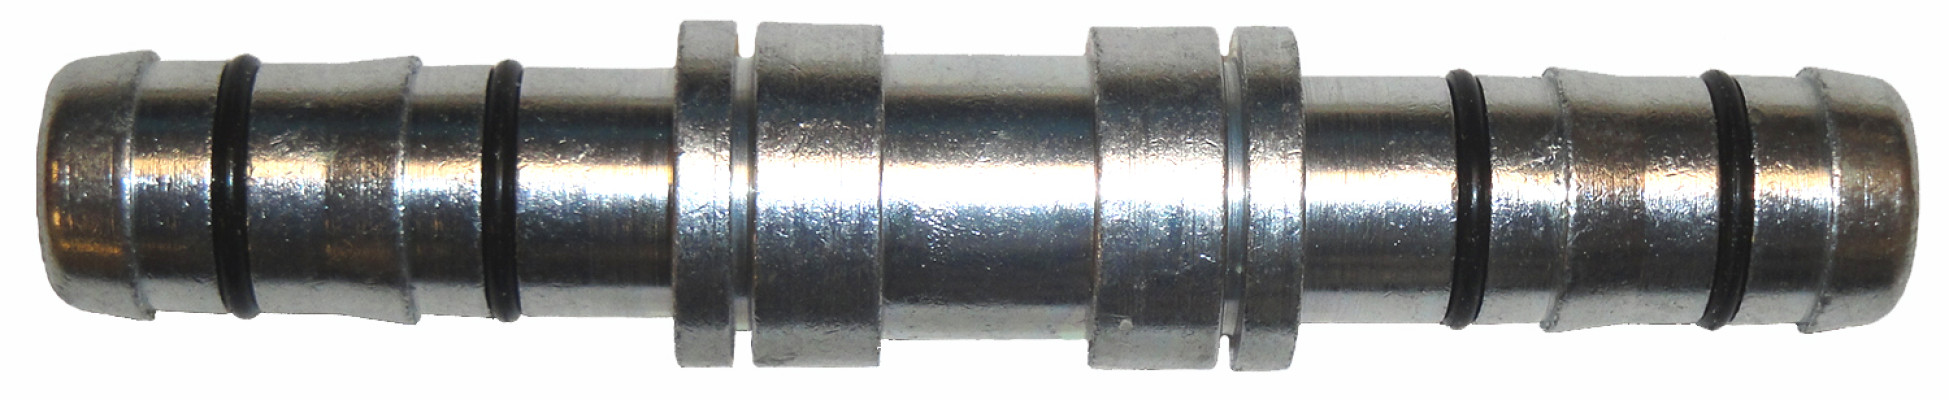 Image of A/C Refrigerant Hose Fitting from Sunair. Part number: FJ3045-1616S